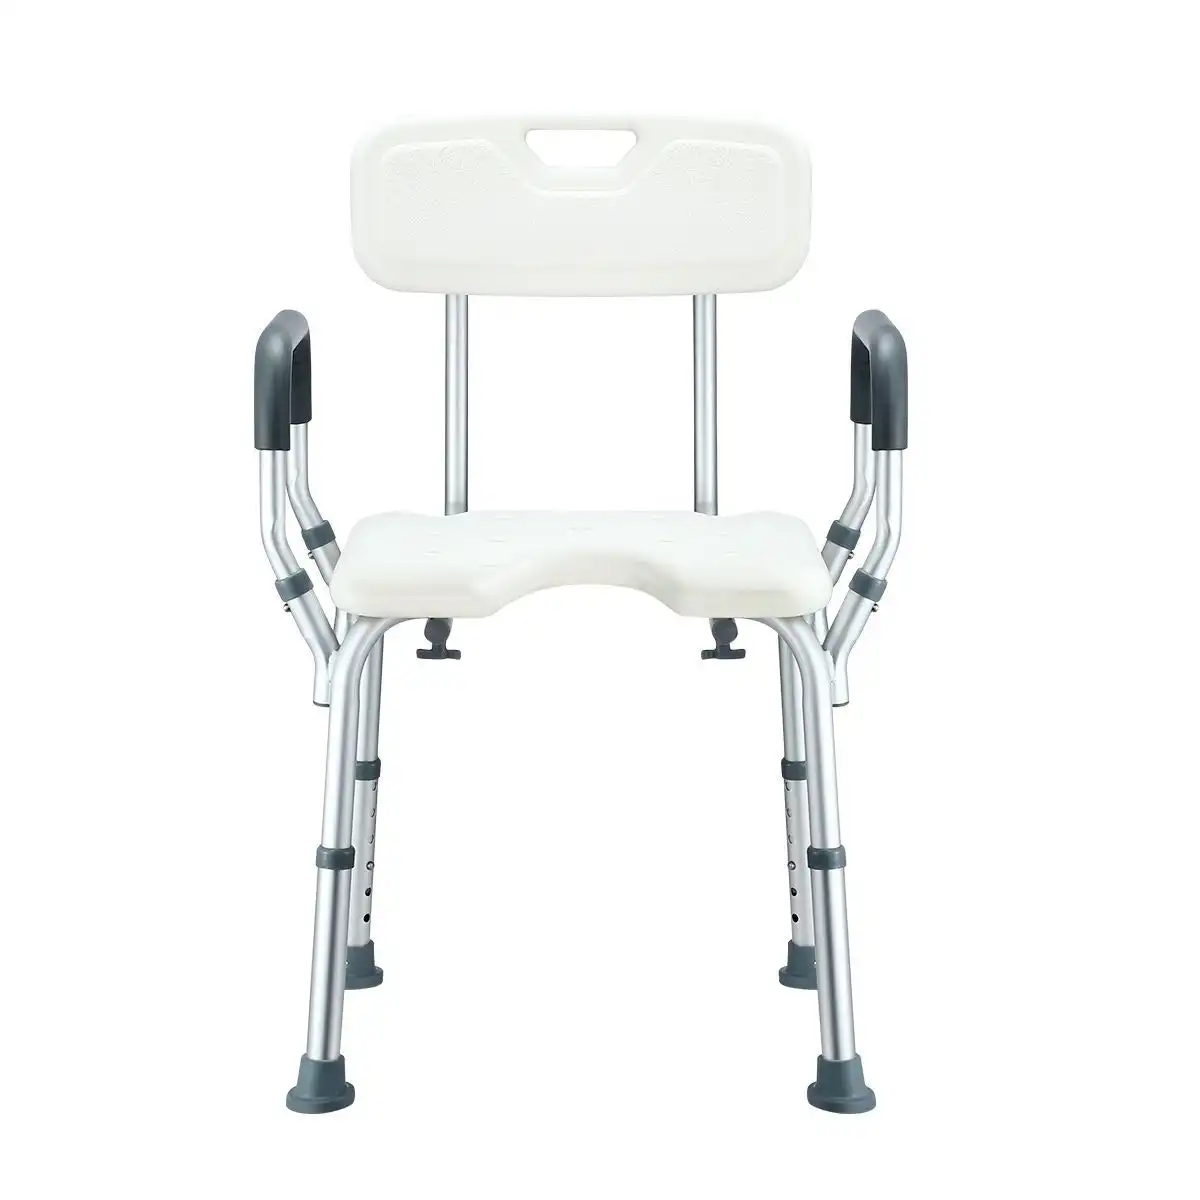 Ausway Medical Shower Chair Bathtub Bath Seat Stool with Back and Armrests